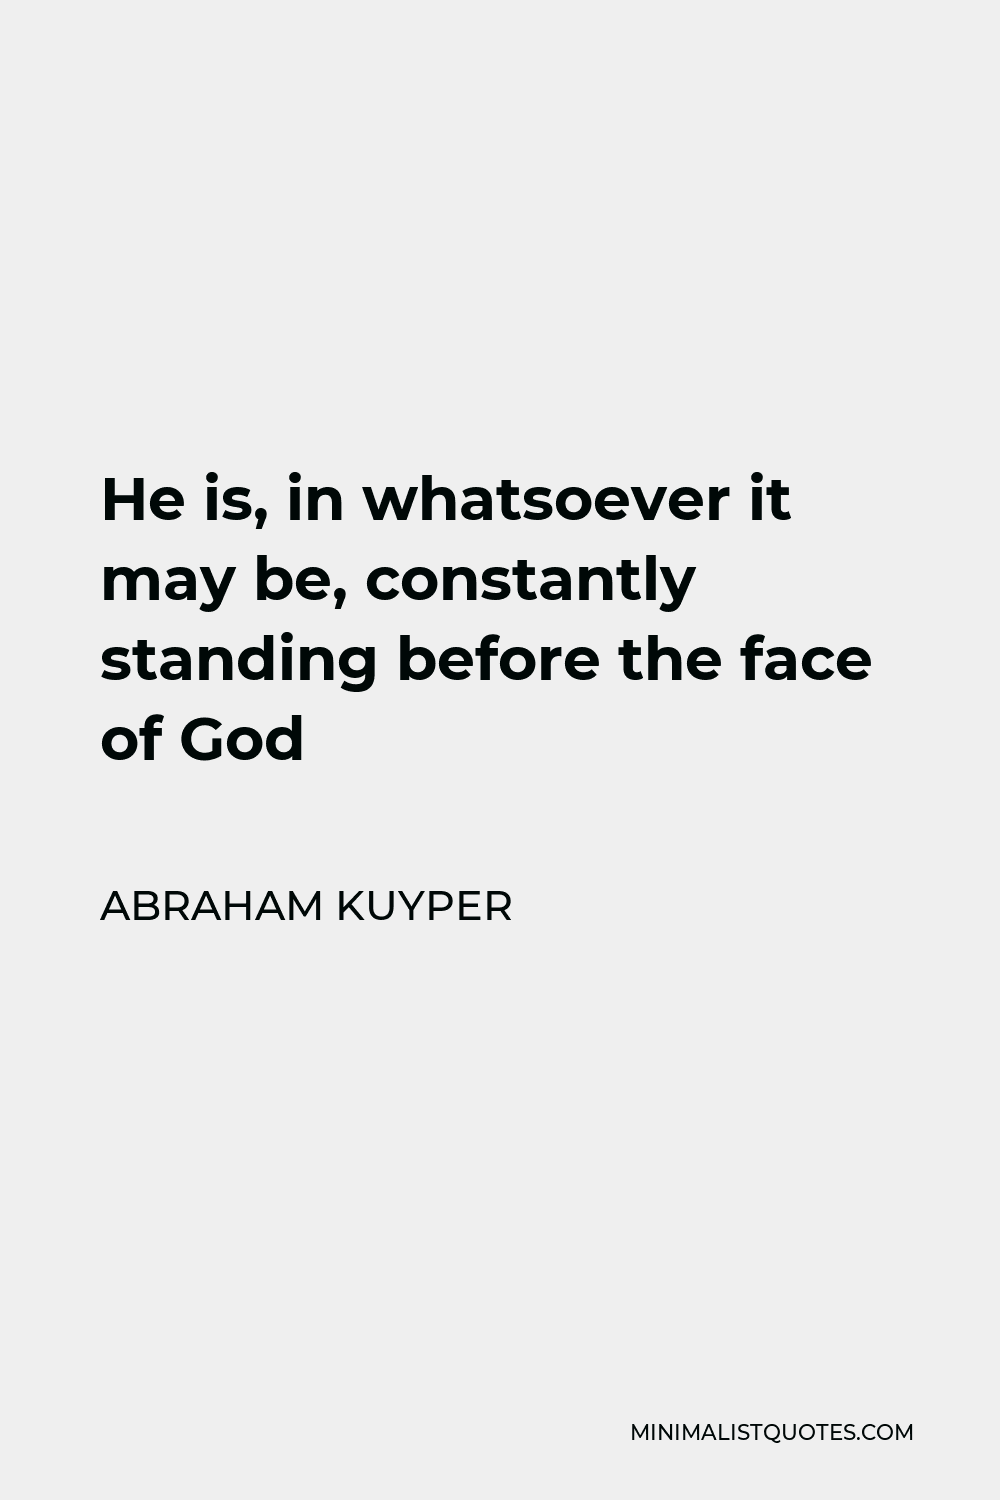 Abraham Kuyper Quote - He is, in whatsoever it may be, constantly standing before the face of God